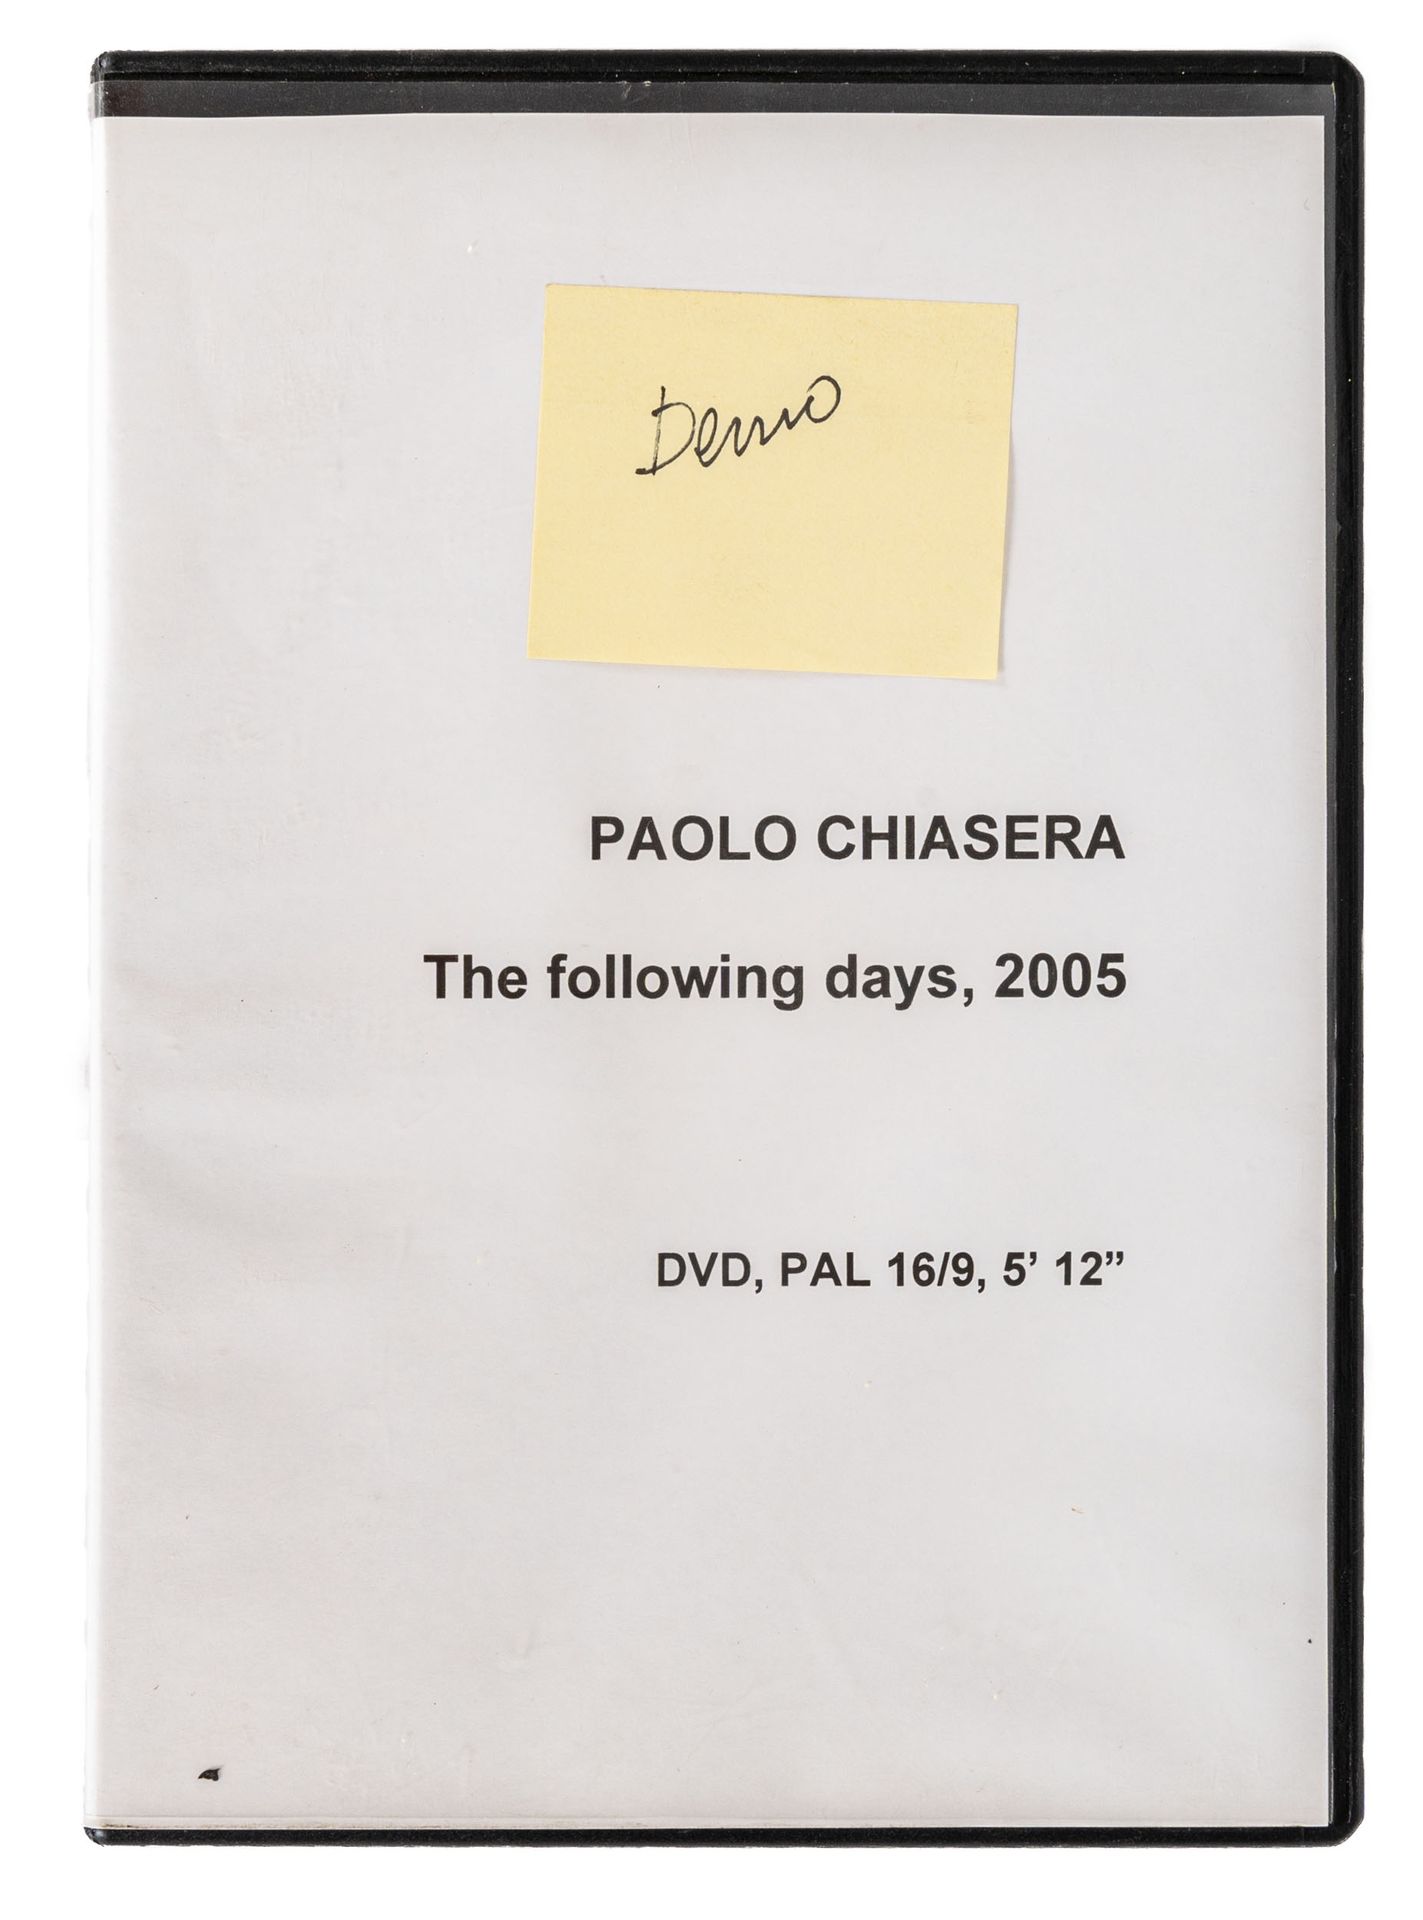 PAOLO CHIASERA PAOLO CHIASERA

(1978)

Untitled

Video DVD and VHS of artist's d&hellip;